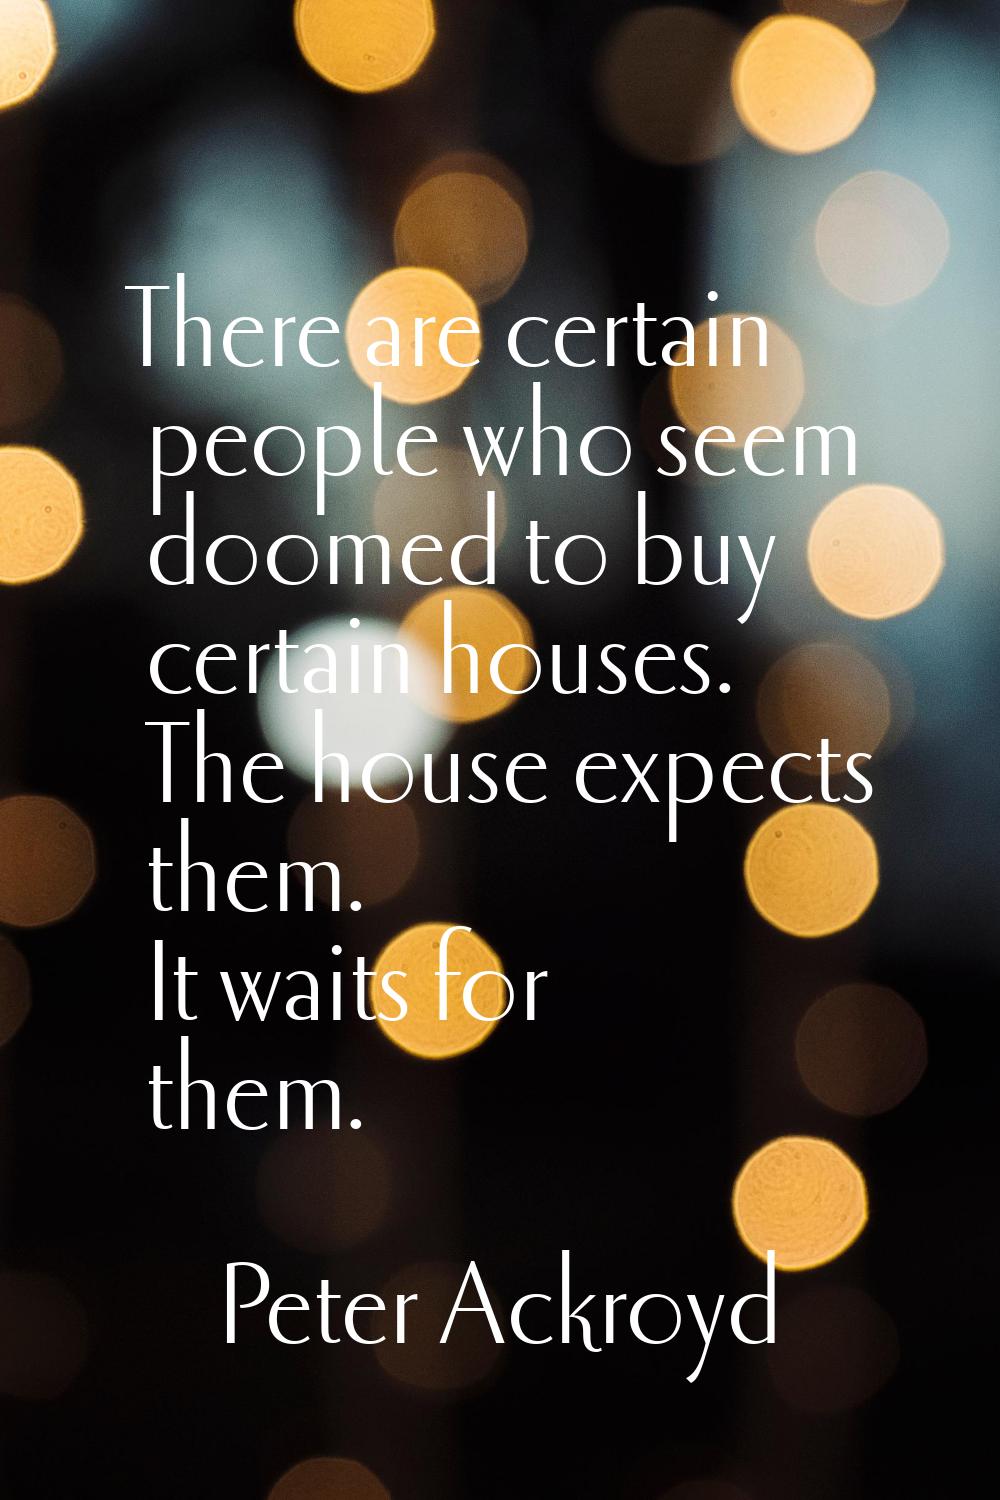 There are certain people who seem doomed to buy certain houses. The house expects them. It waits fo